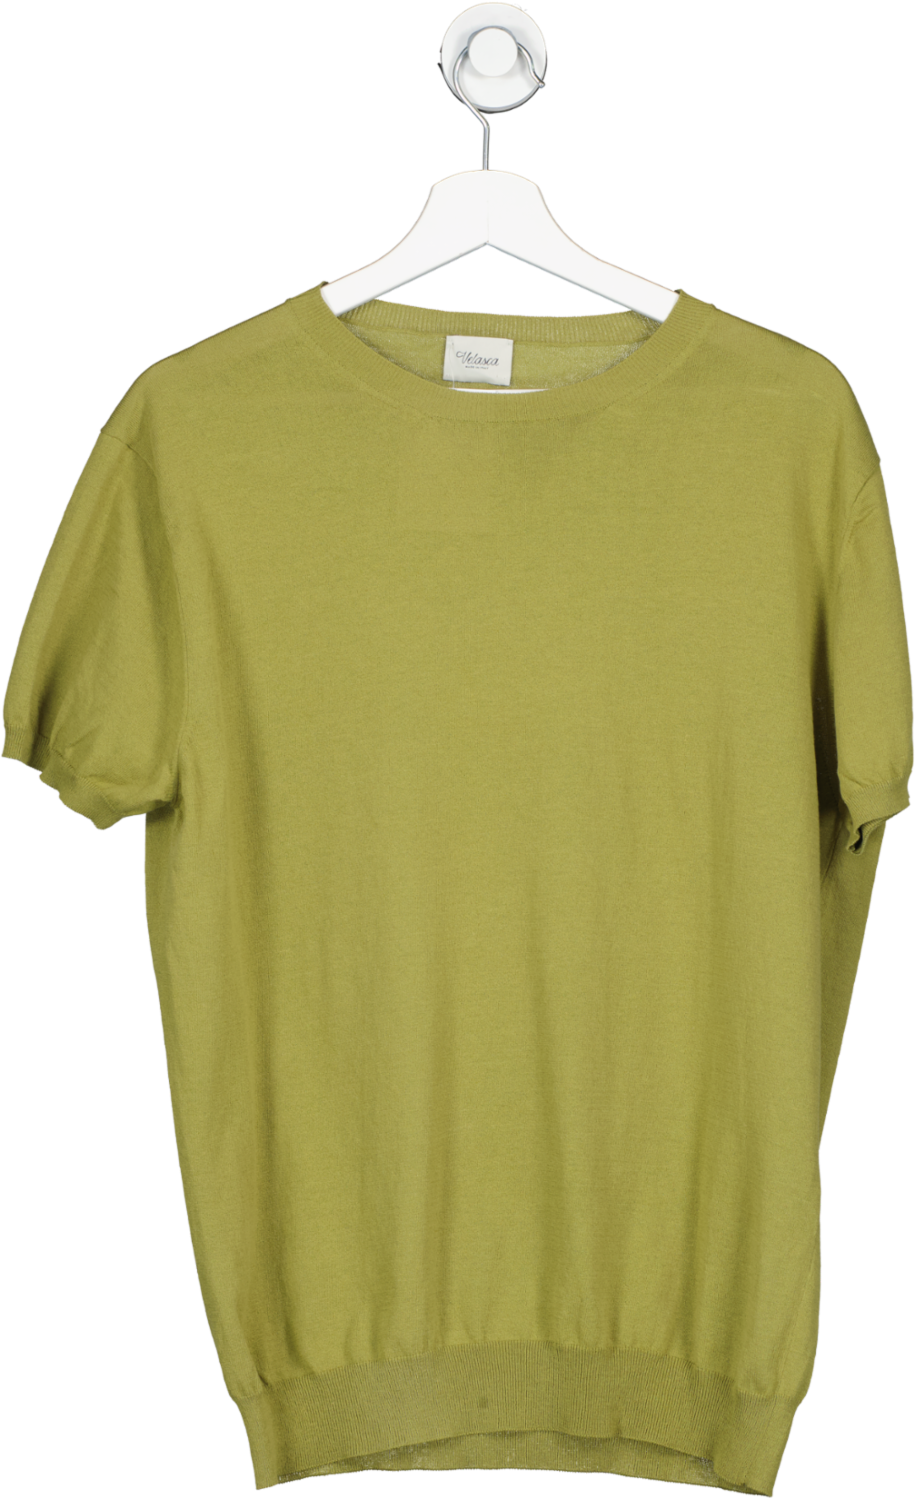 velasca Olive Green Knitted Cotton T Shirt UK M